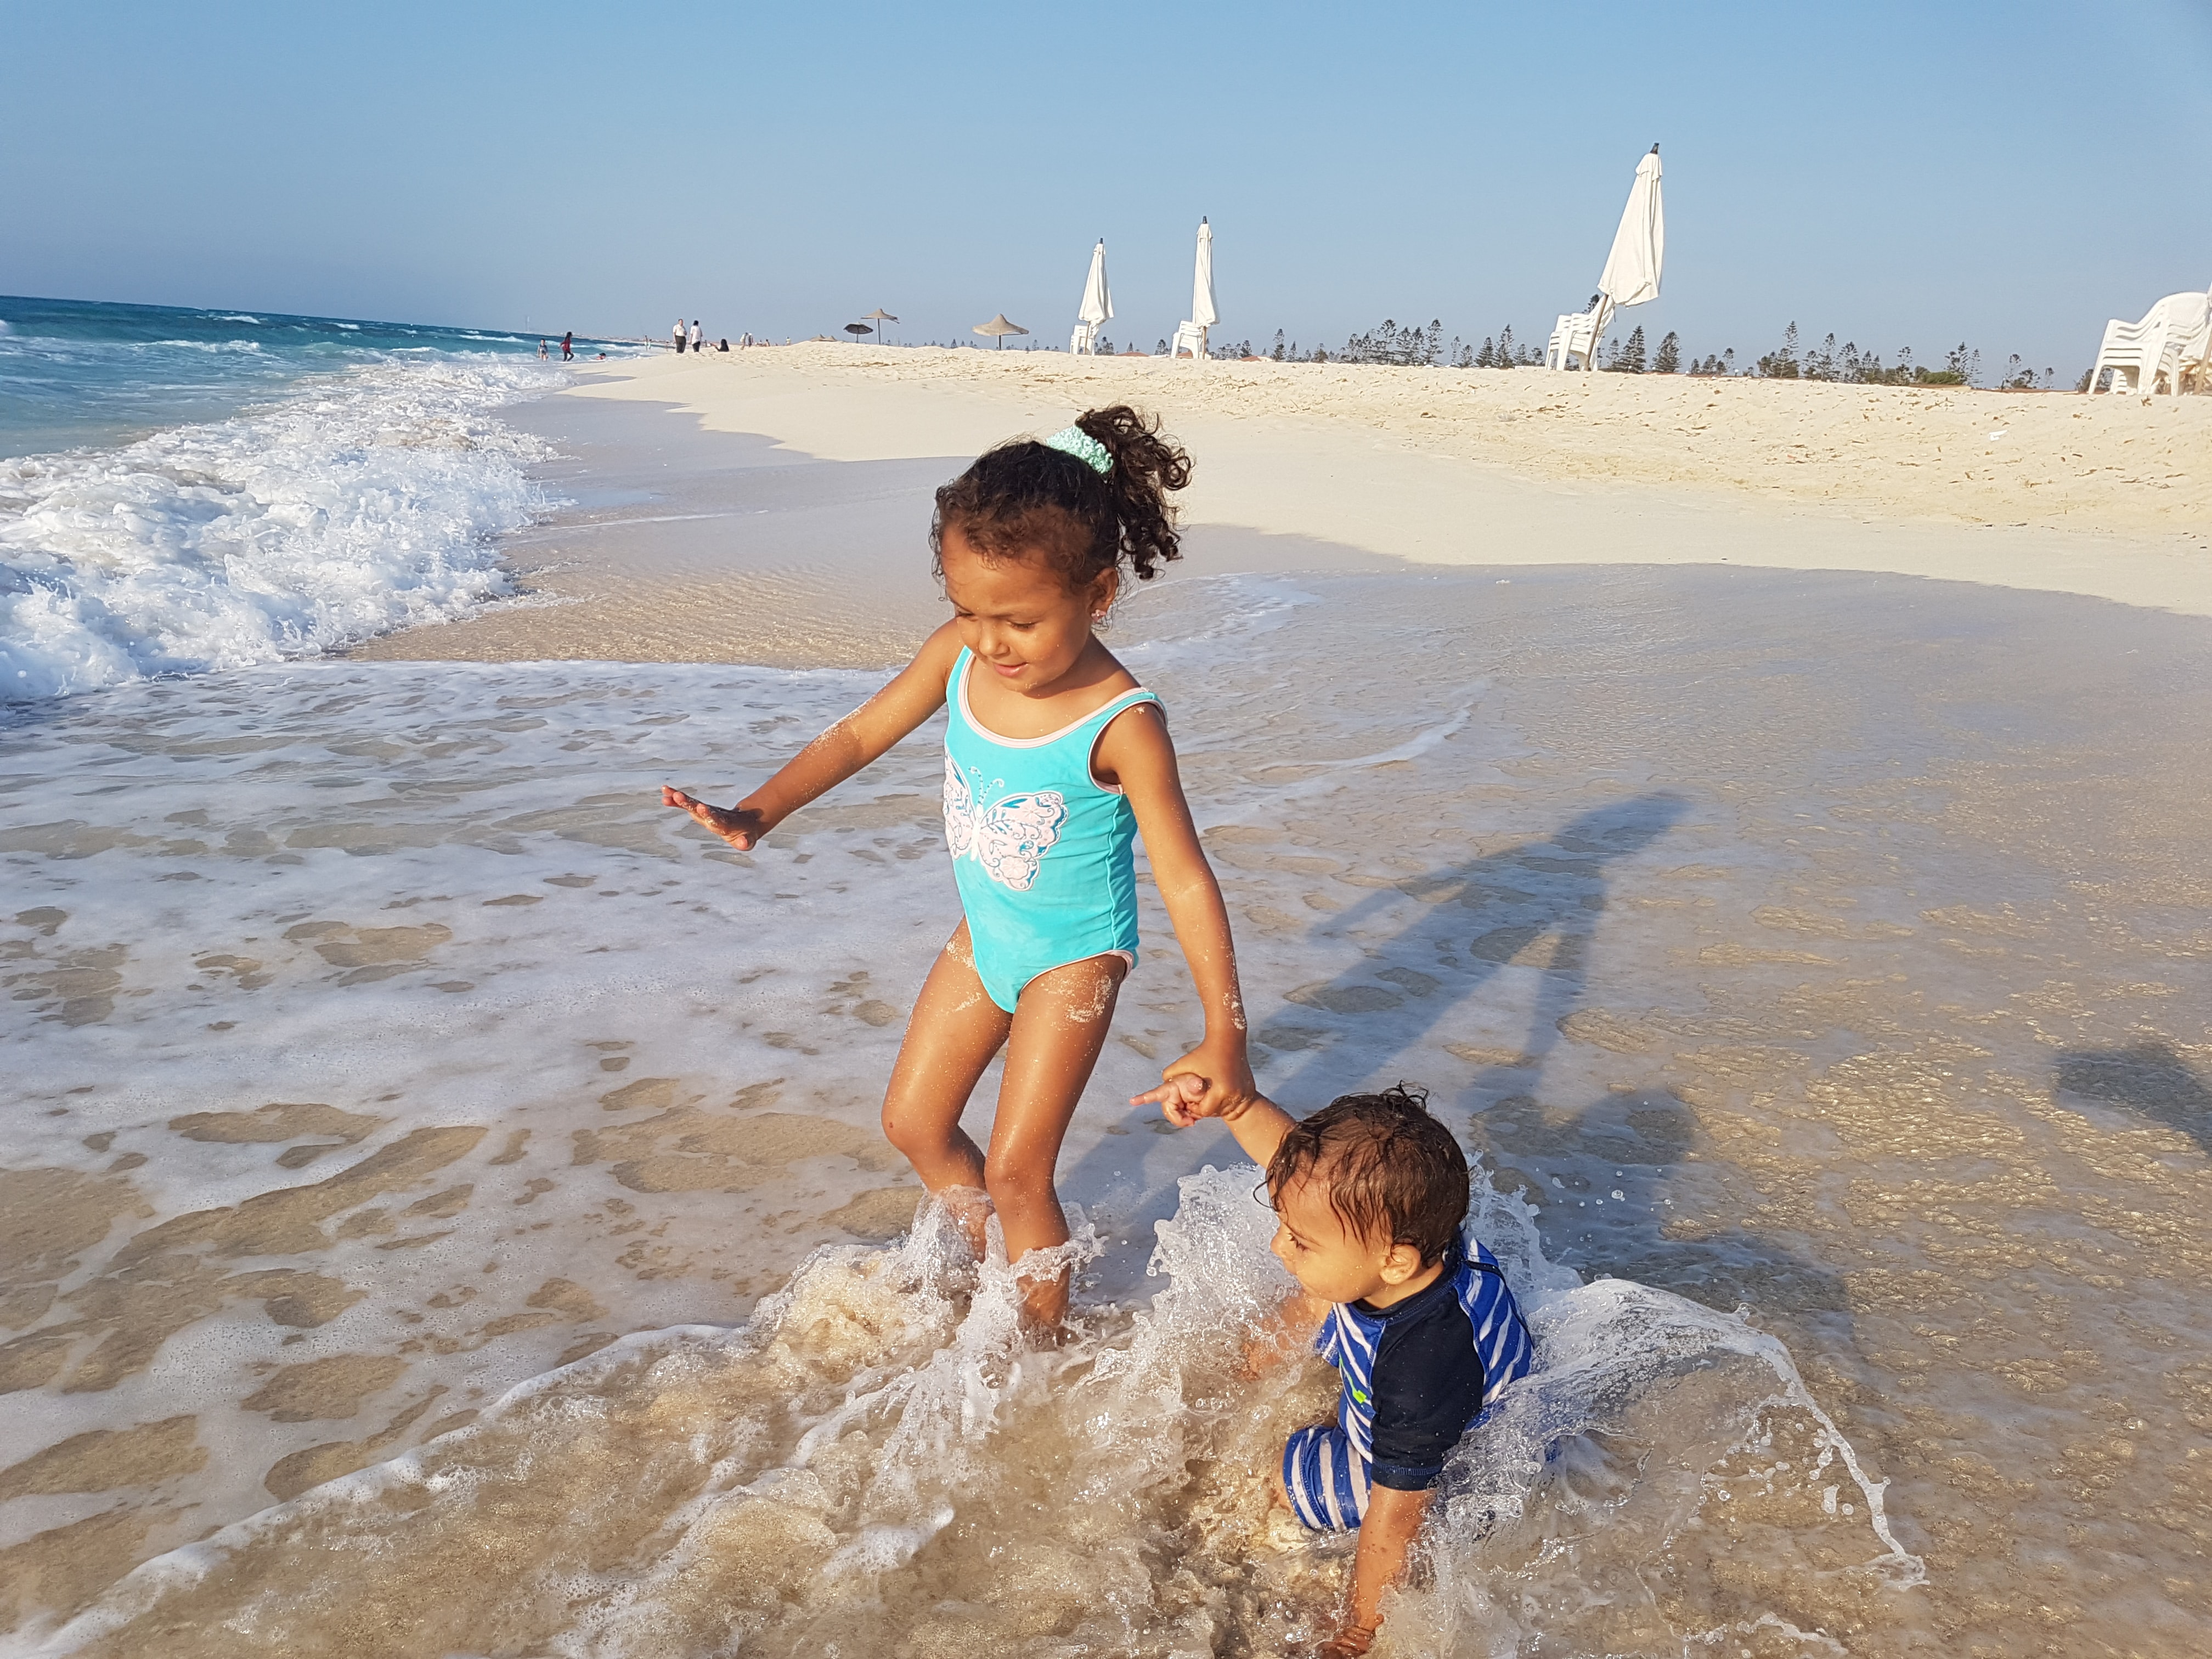 Kids playing in the surf on a white sand beach